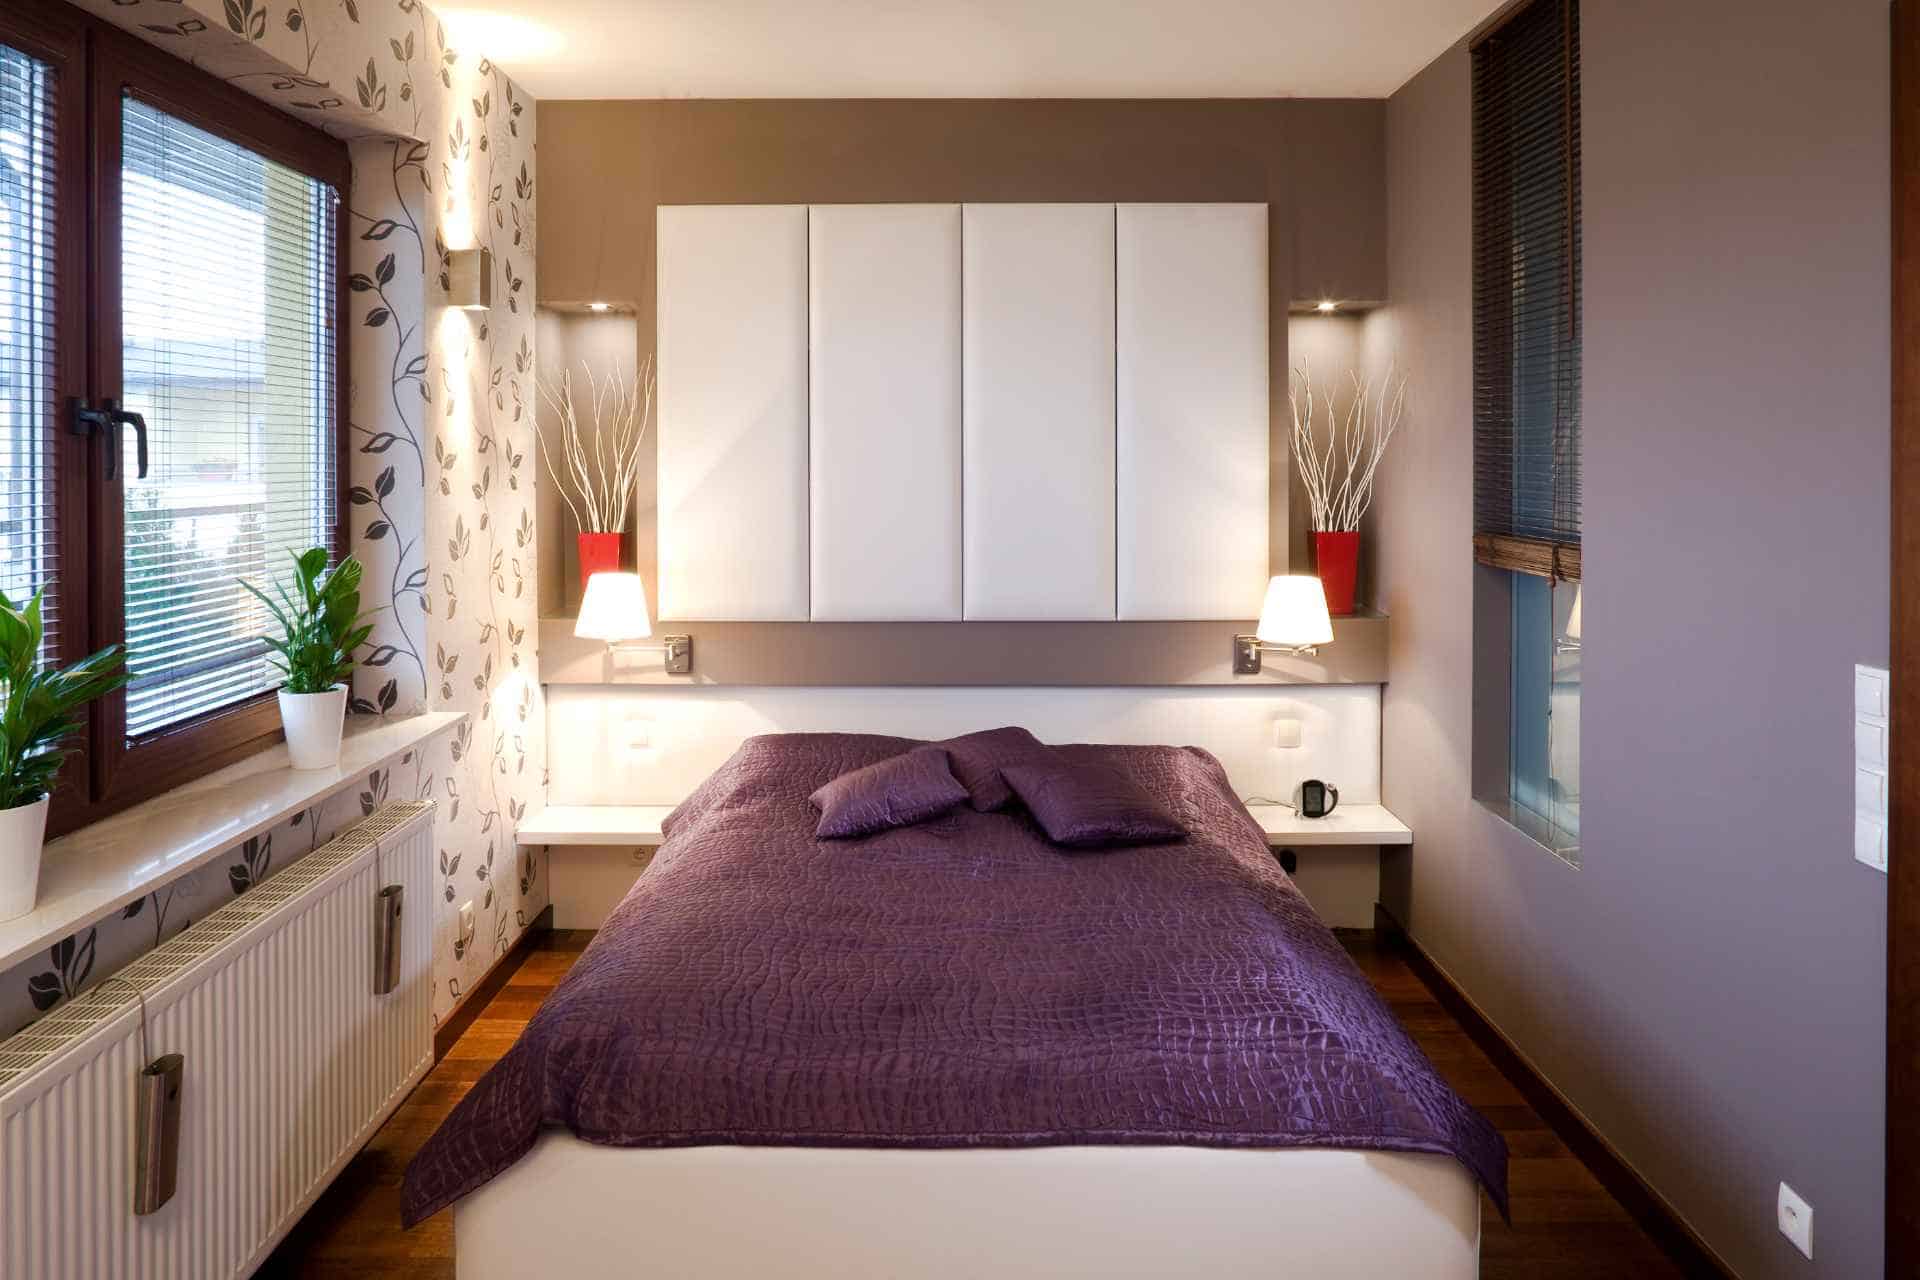 Small Bedroom Feng Shui Bedroom Layout Tips for Harmonious Design